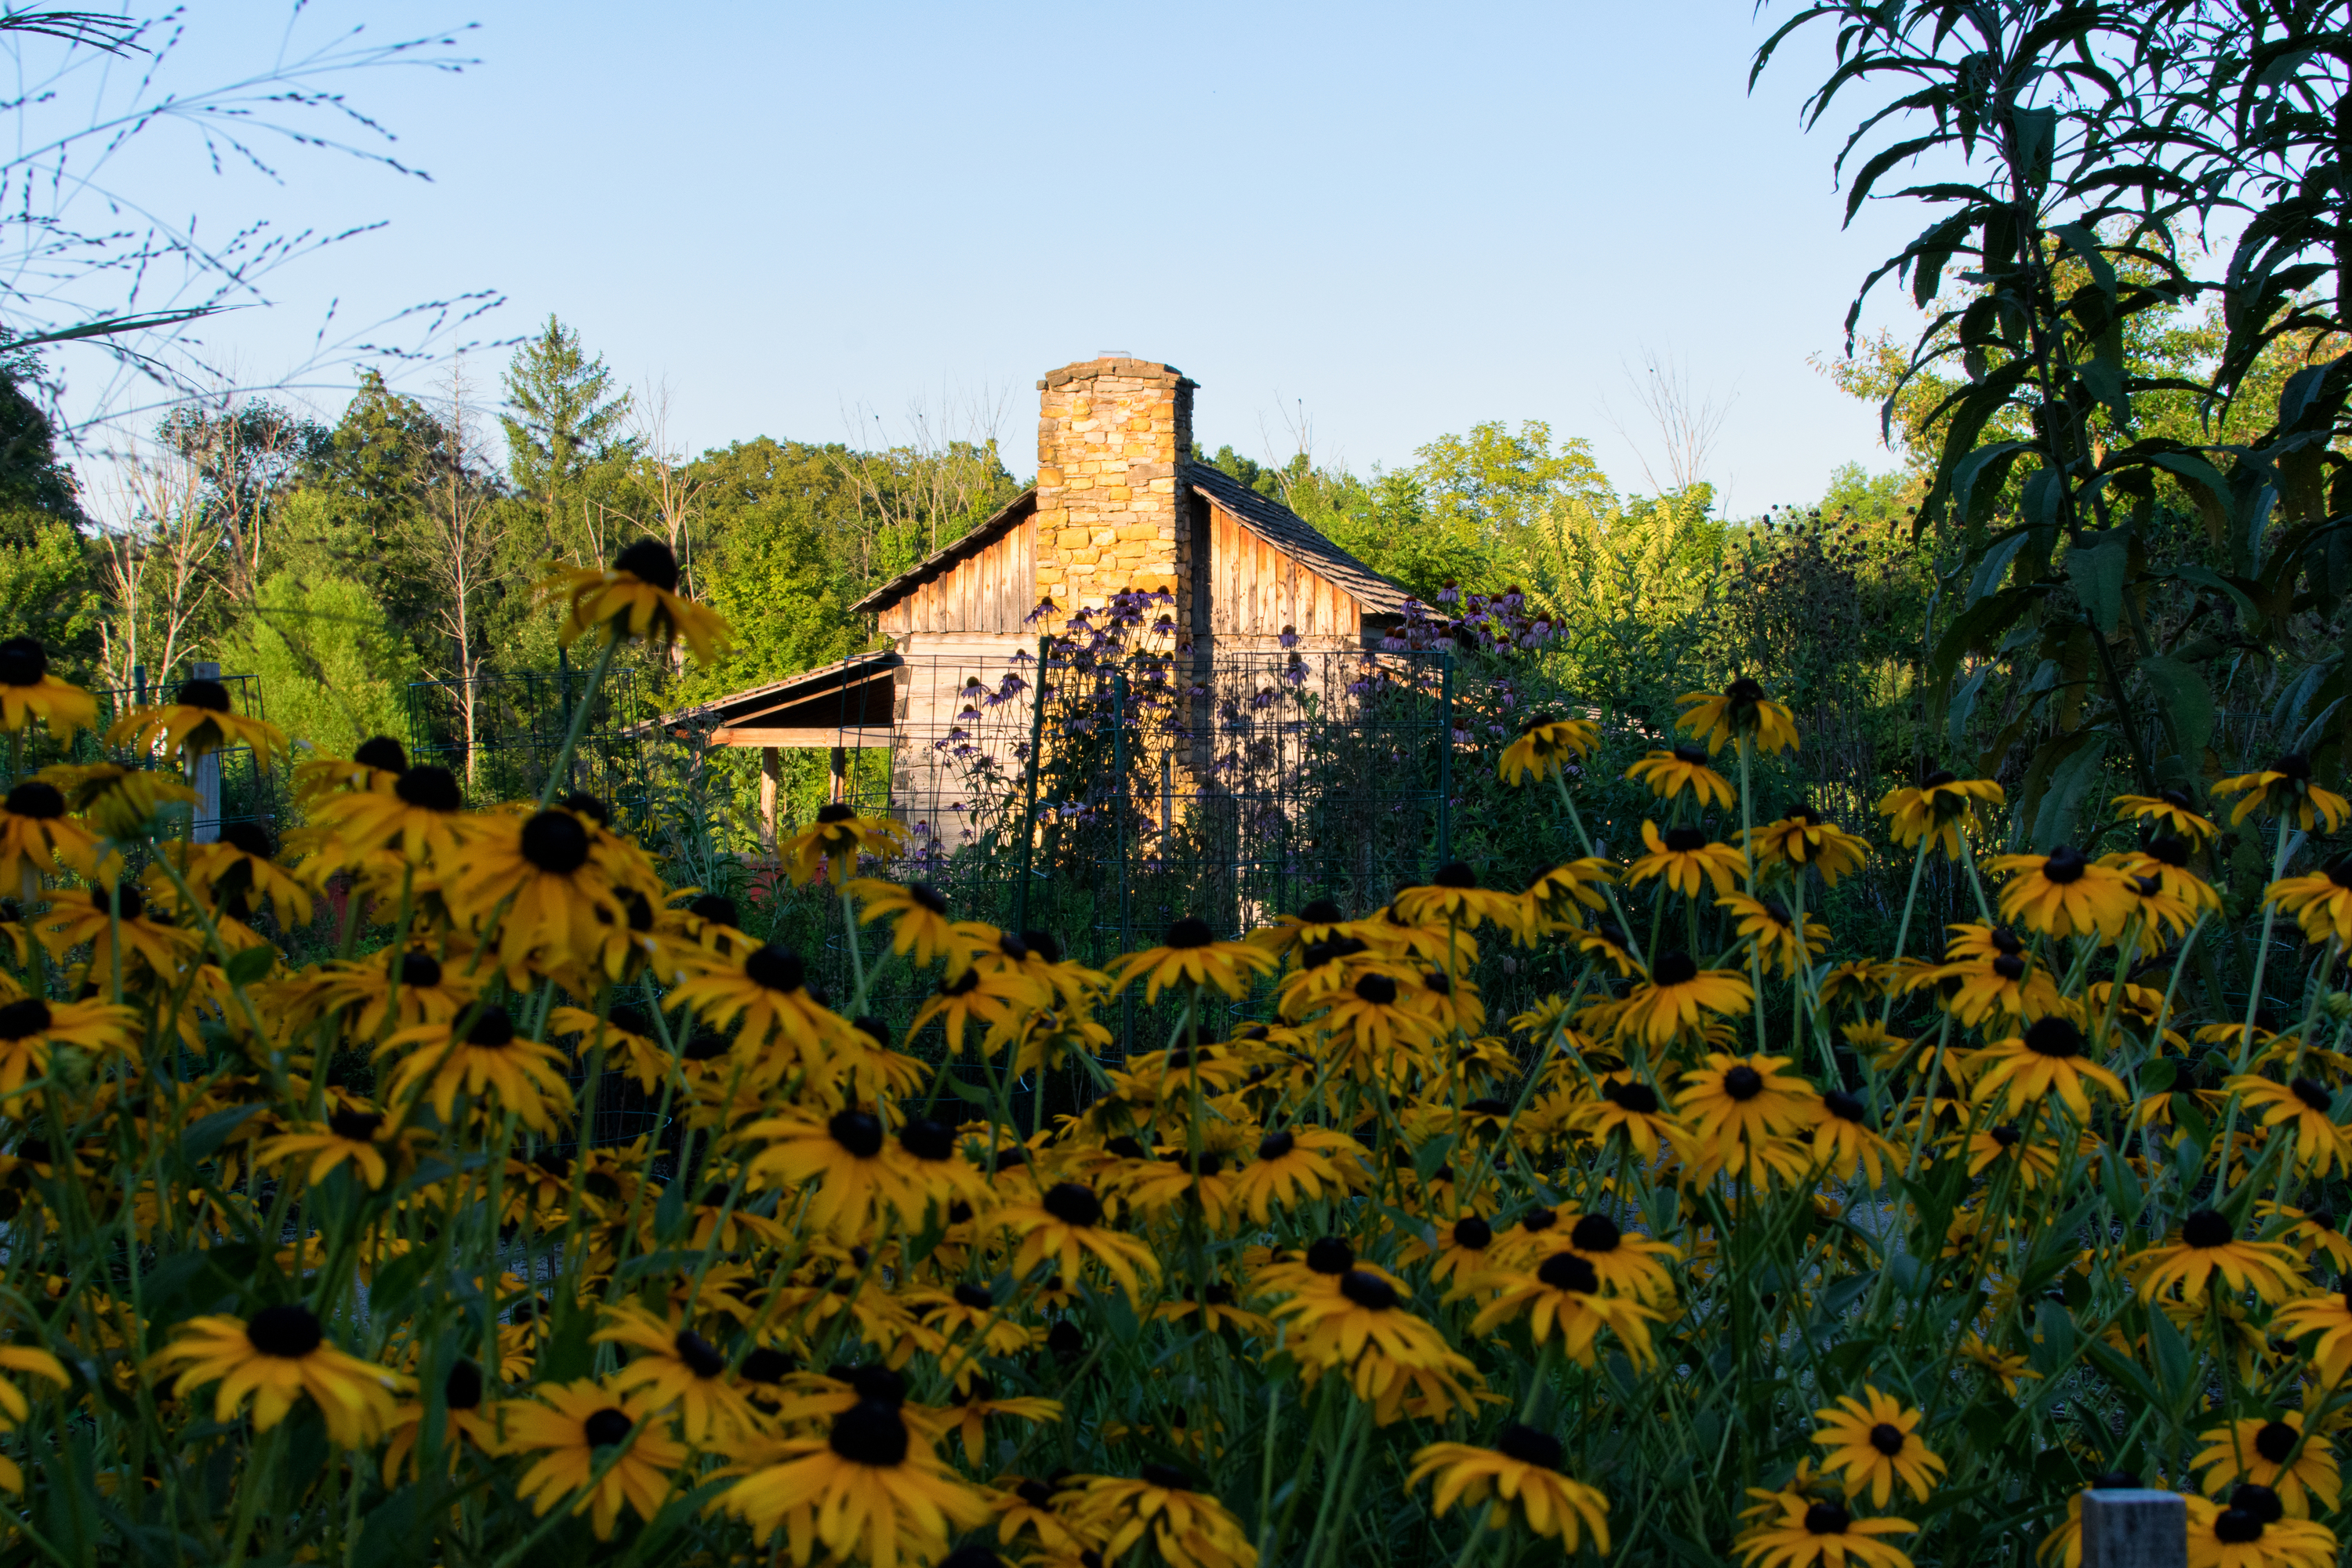 Abner Hollow Cabin behind a field of yellow flowers